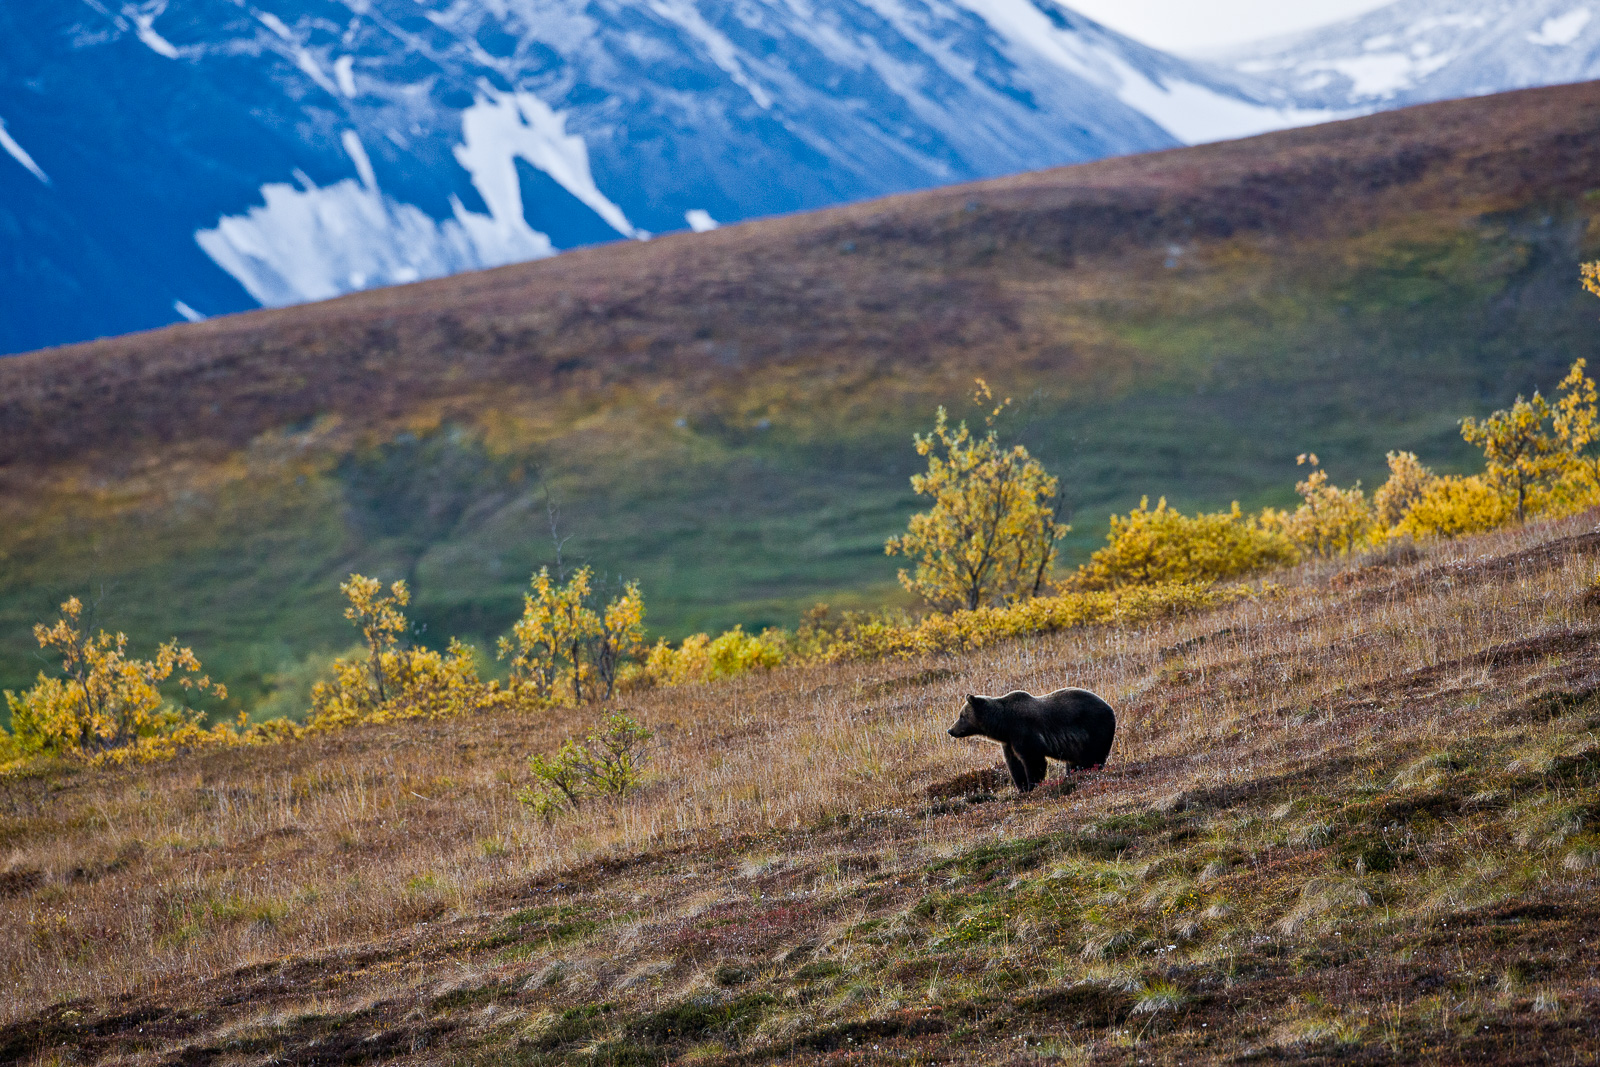 Grizzly along the mountain range in Alaska.